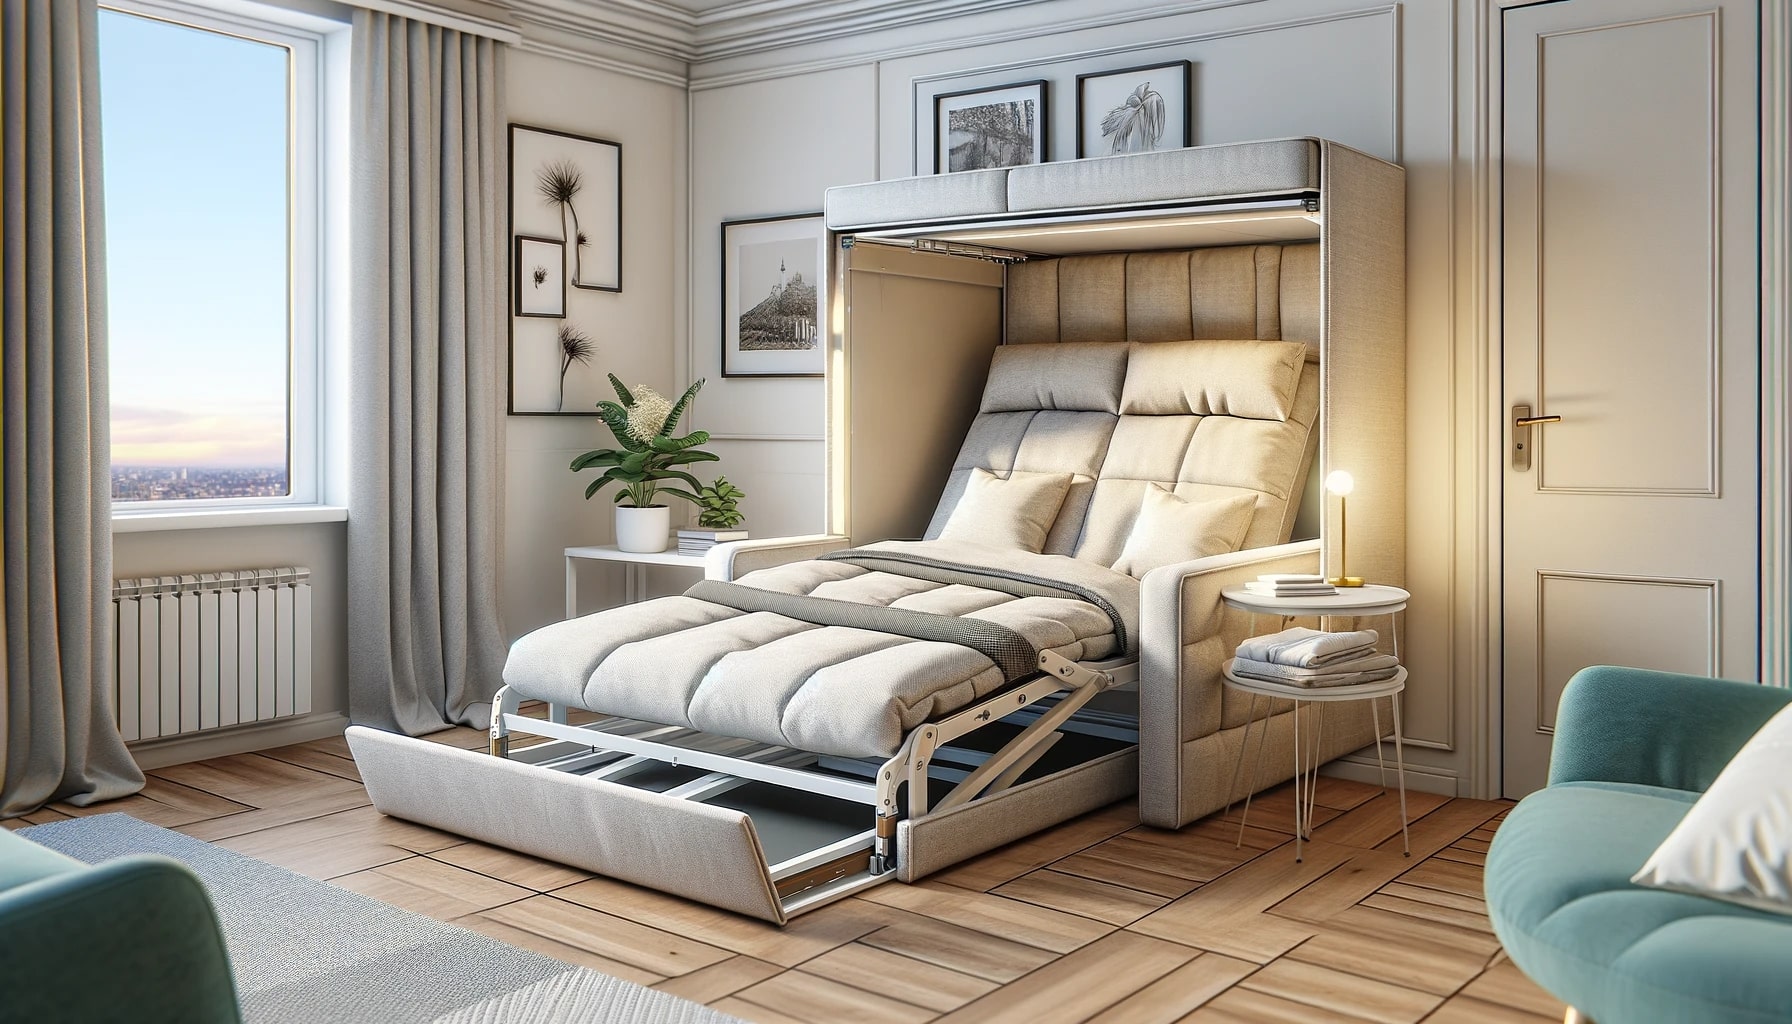 A small bedroom with space-saving furniture including a bed and a chair.